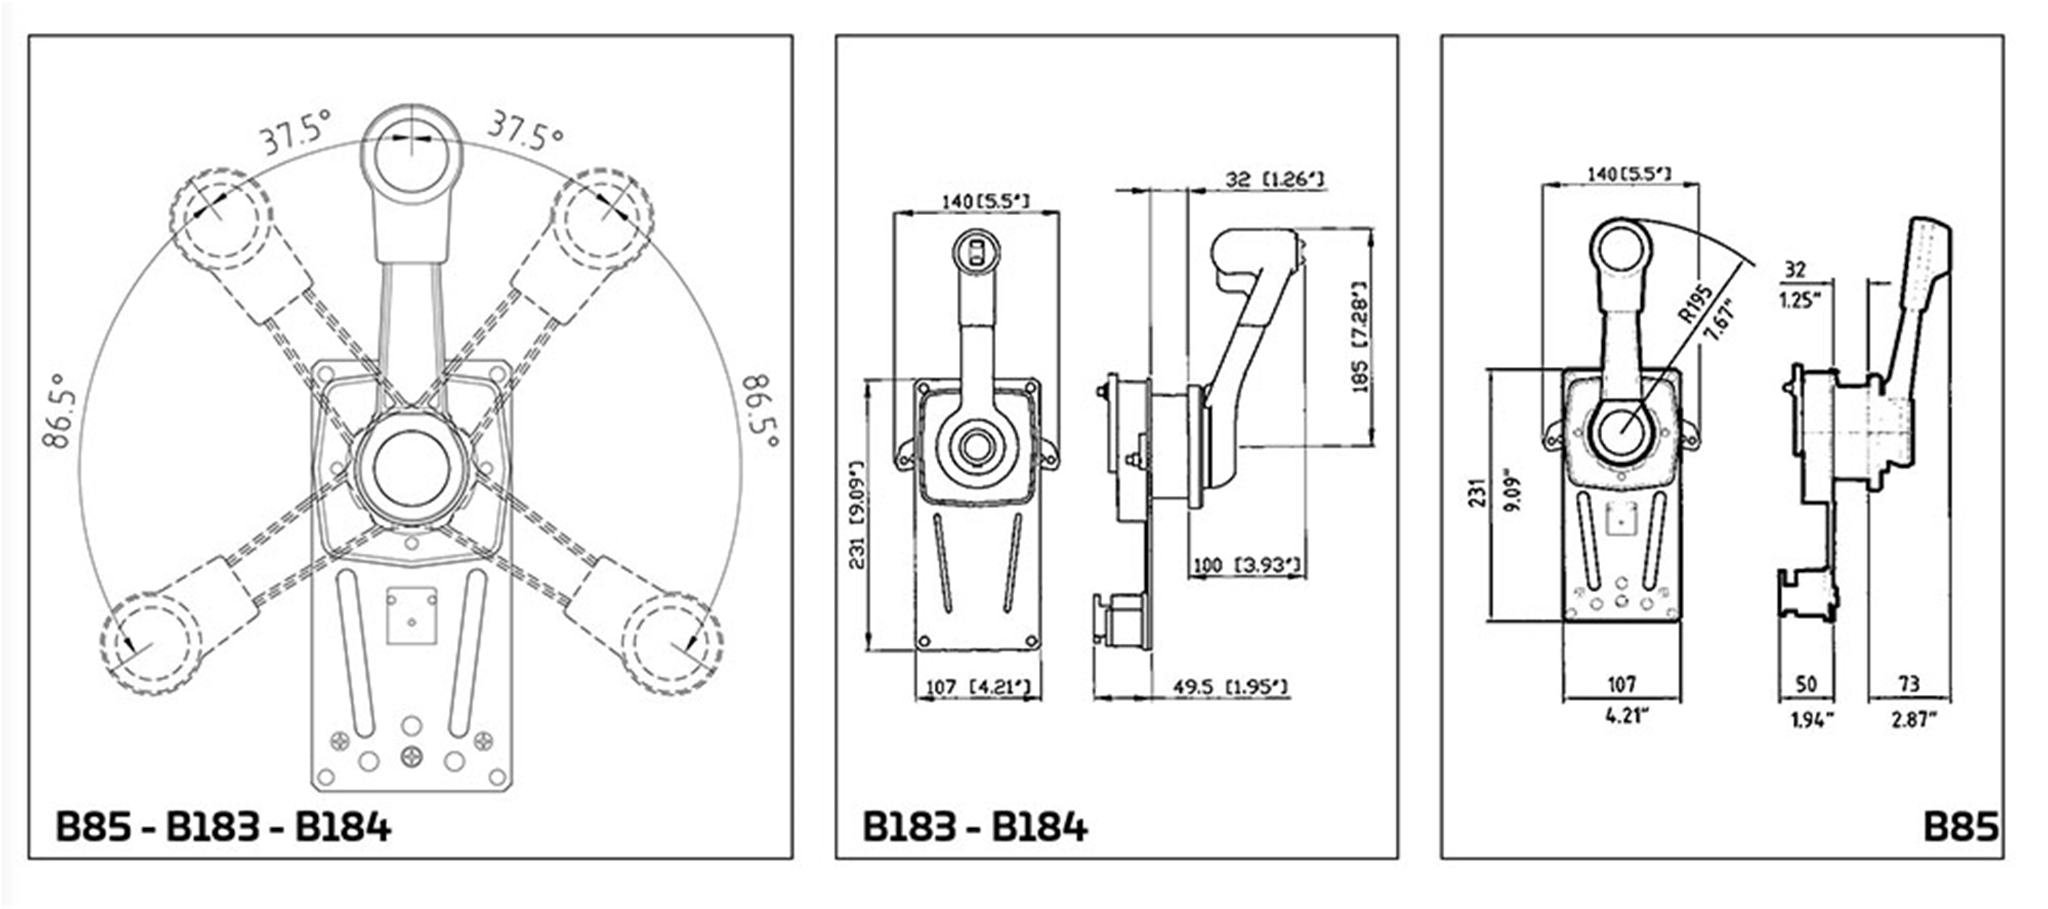 B184 38946 D Single Lever Side Mount Control With Trim In Handle Specifications